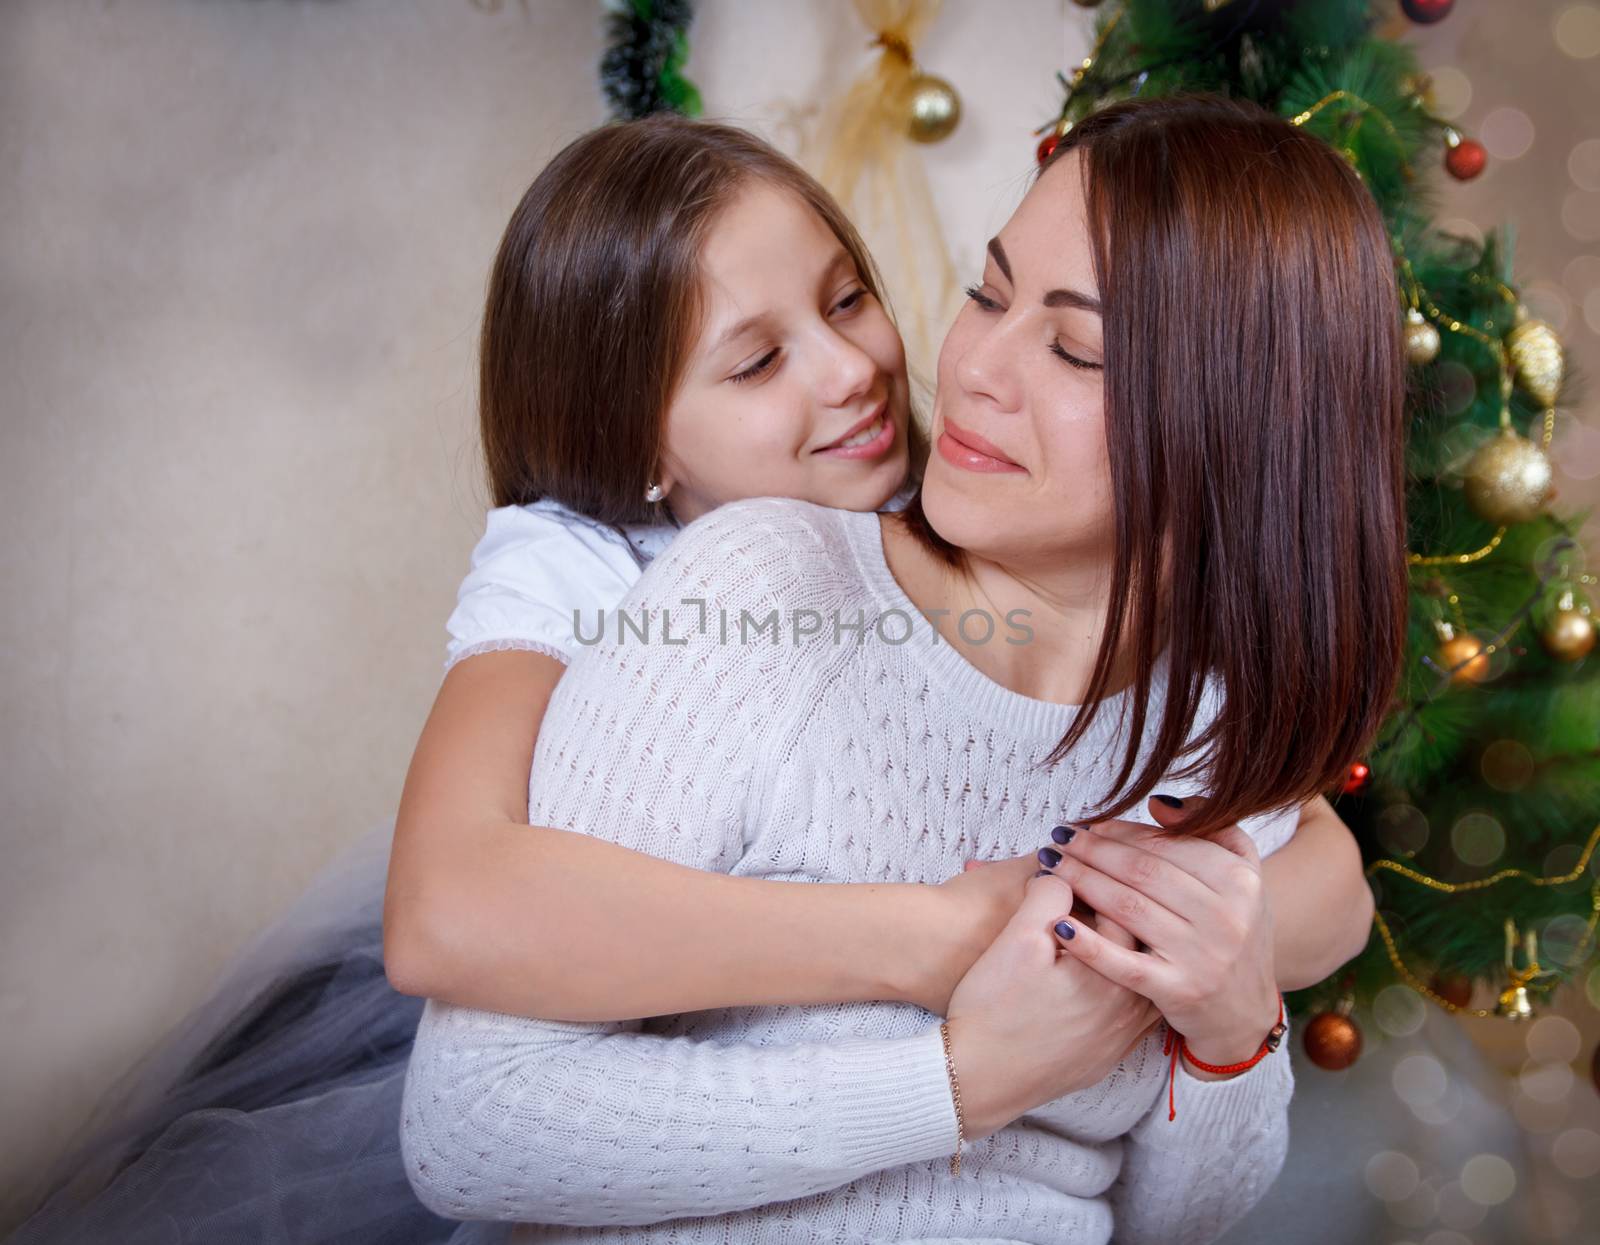 Daughter hugging mother under Christmas tree